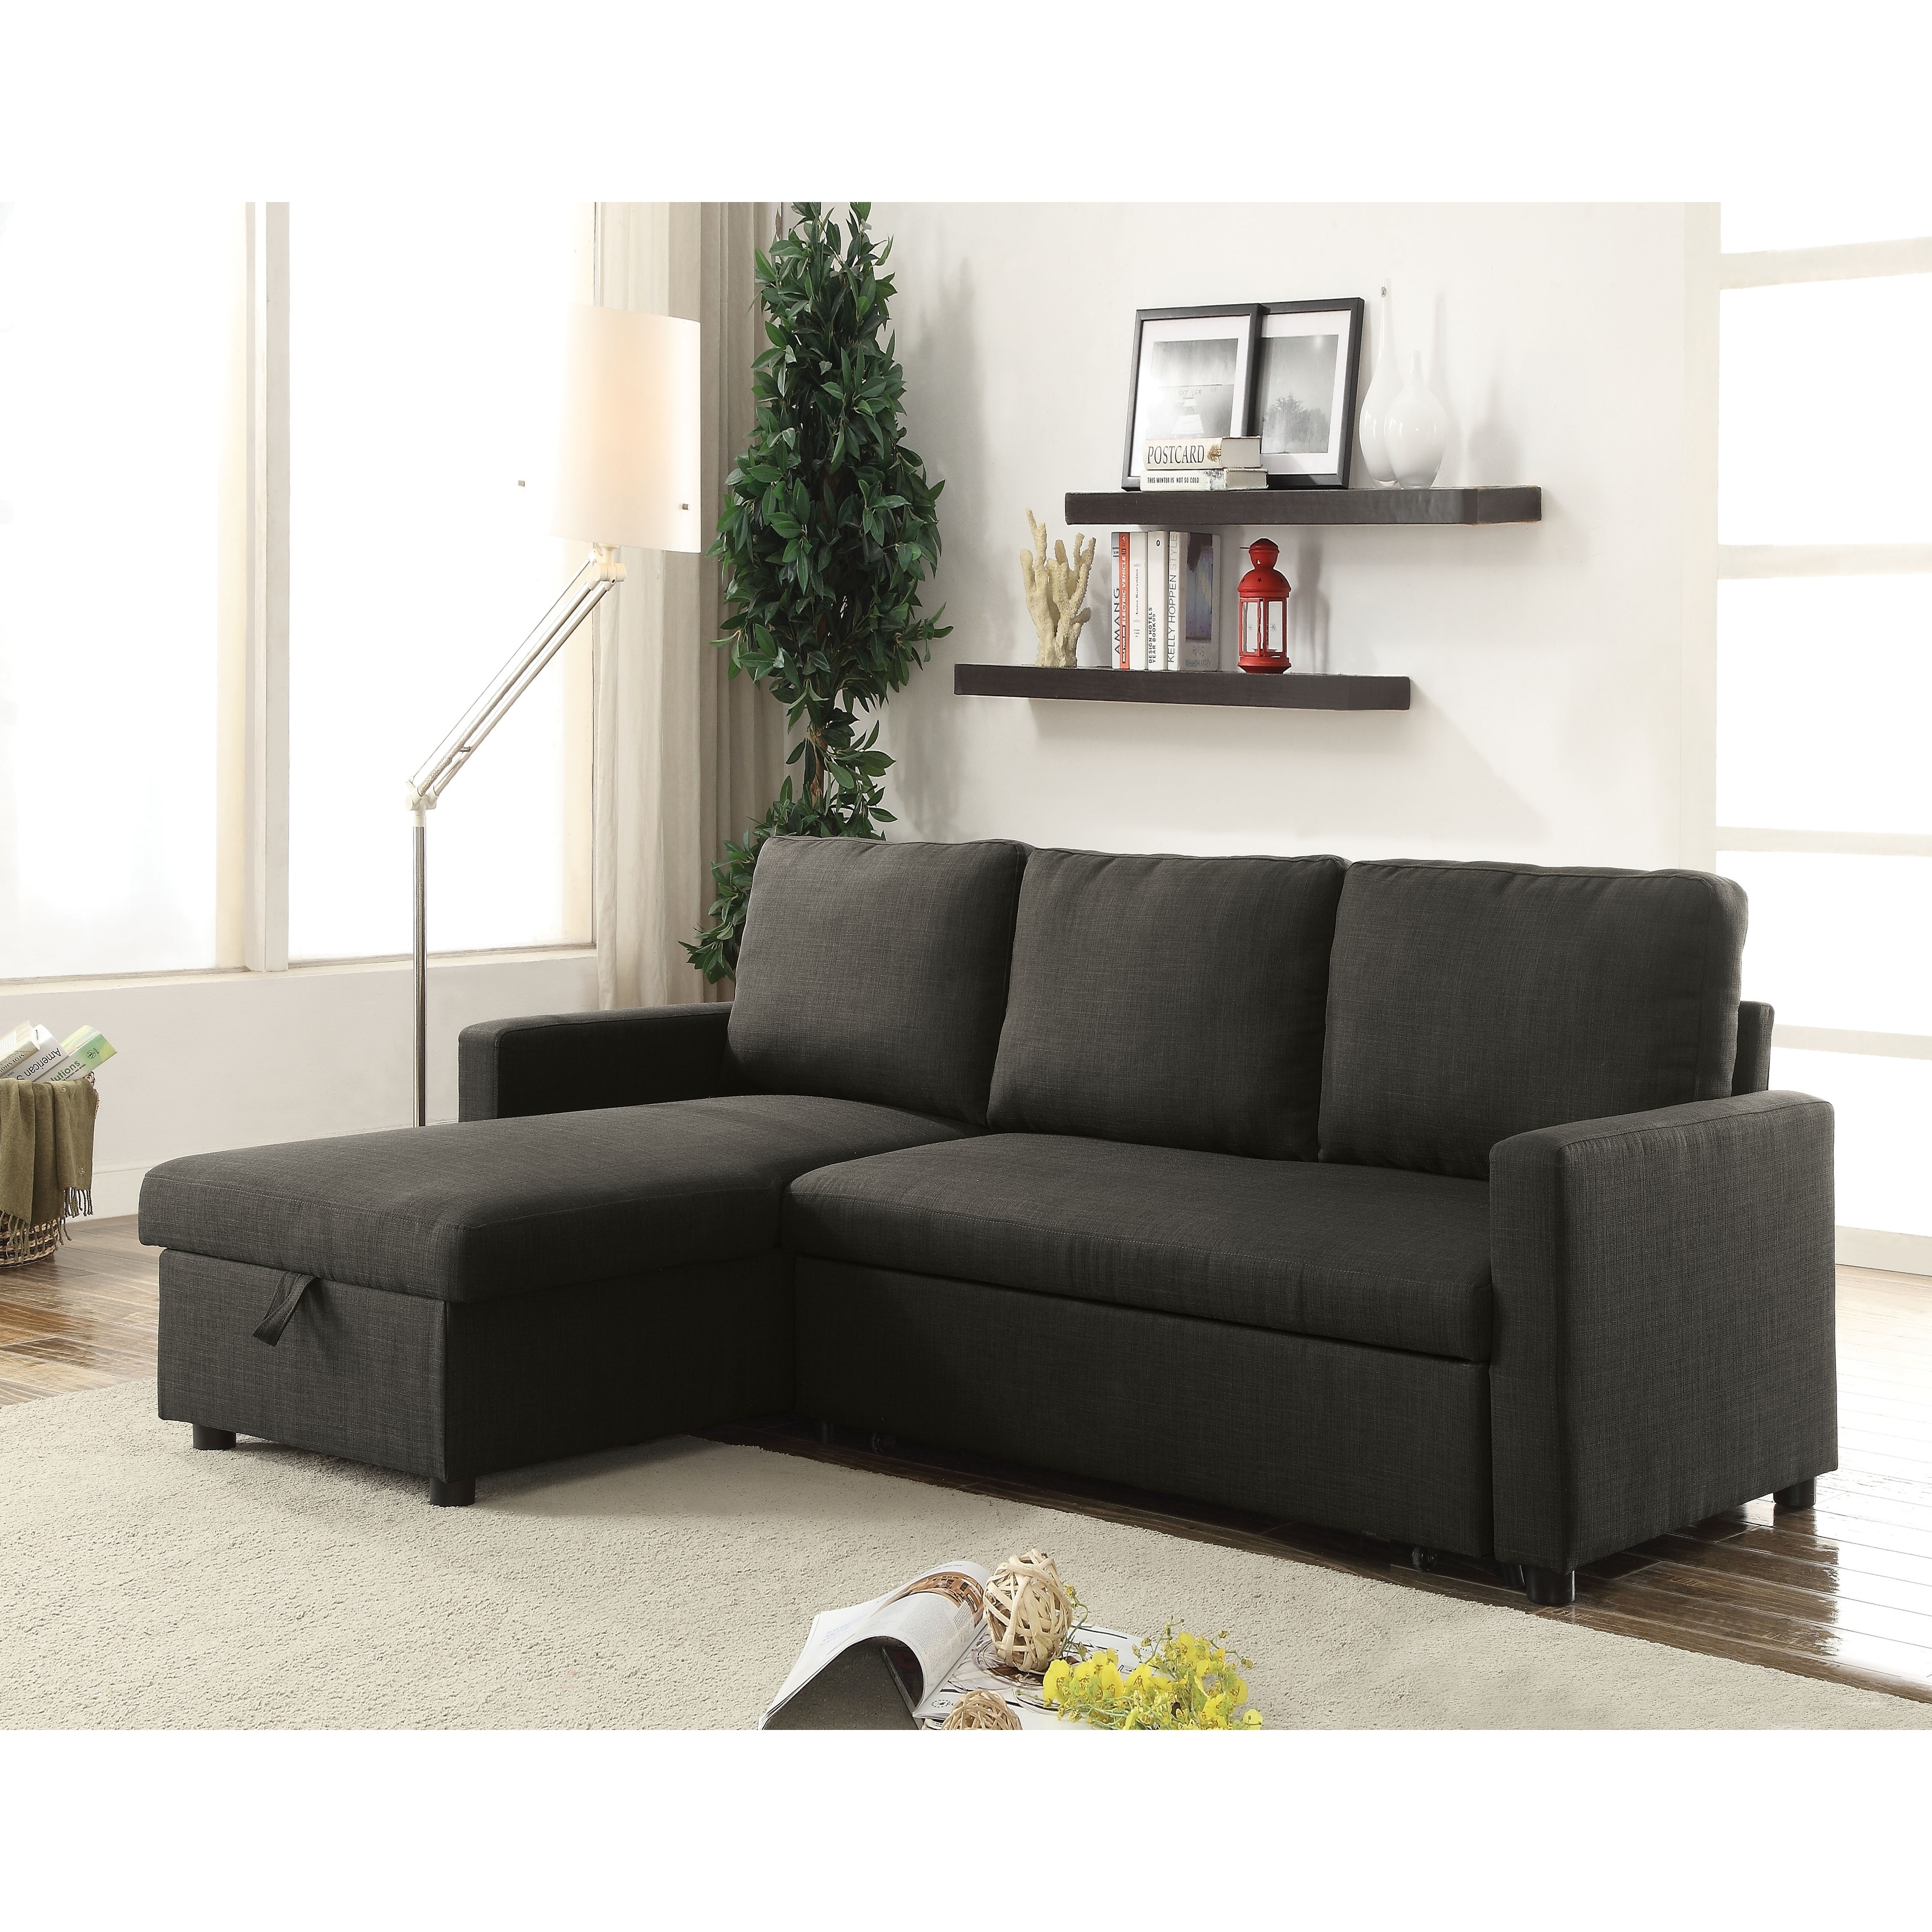 Benjara Fabric Upholstered Sectional Sofa with Pull Out Sleeper and Hidden Storage, Black